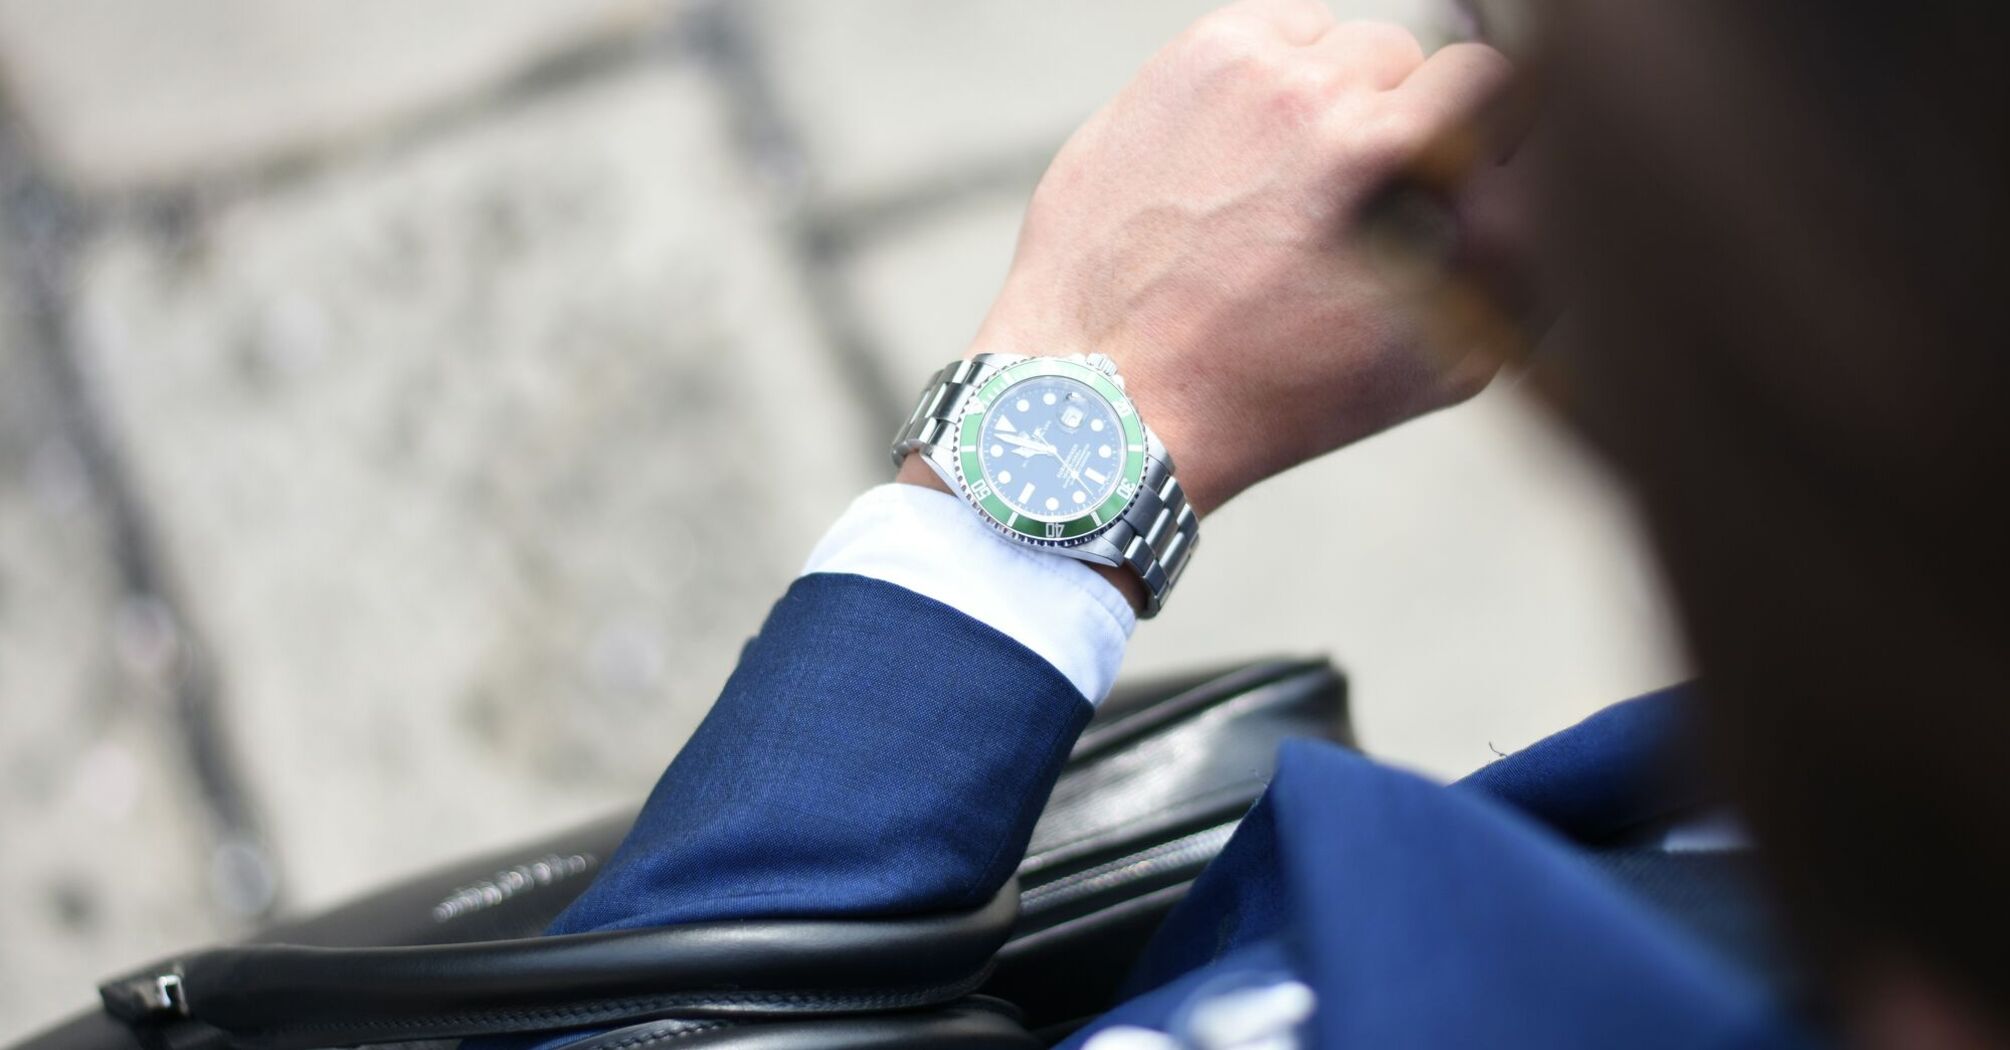 Close-up of a person's wrist wearing a luxury watch with a green bezel, white shirt, and blue suit